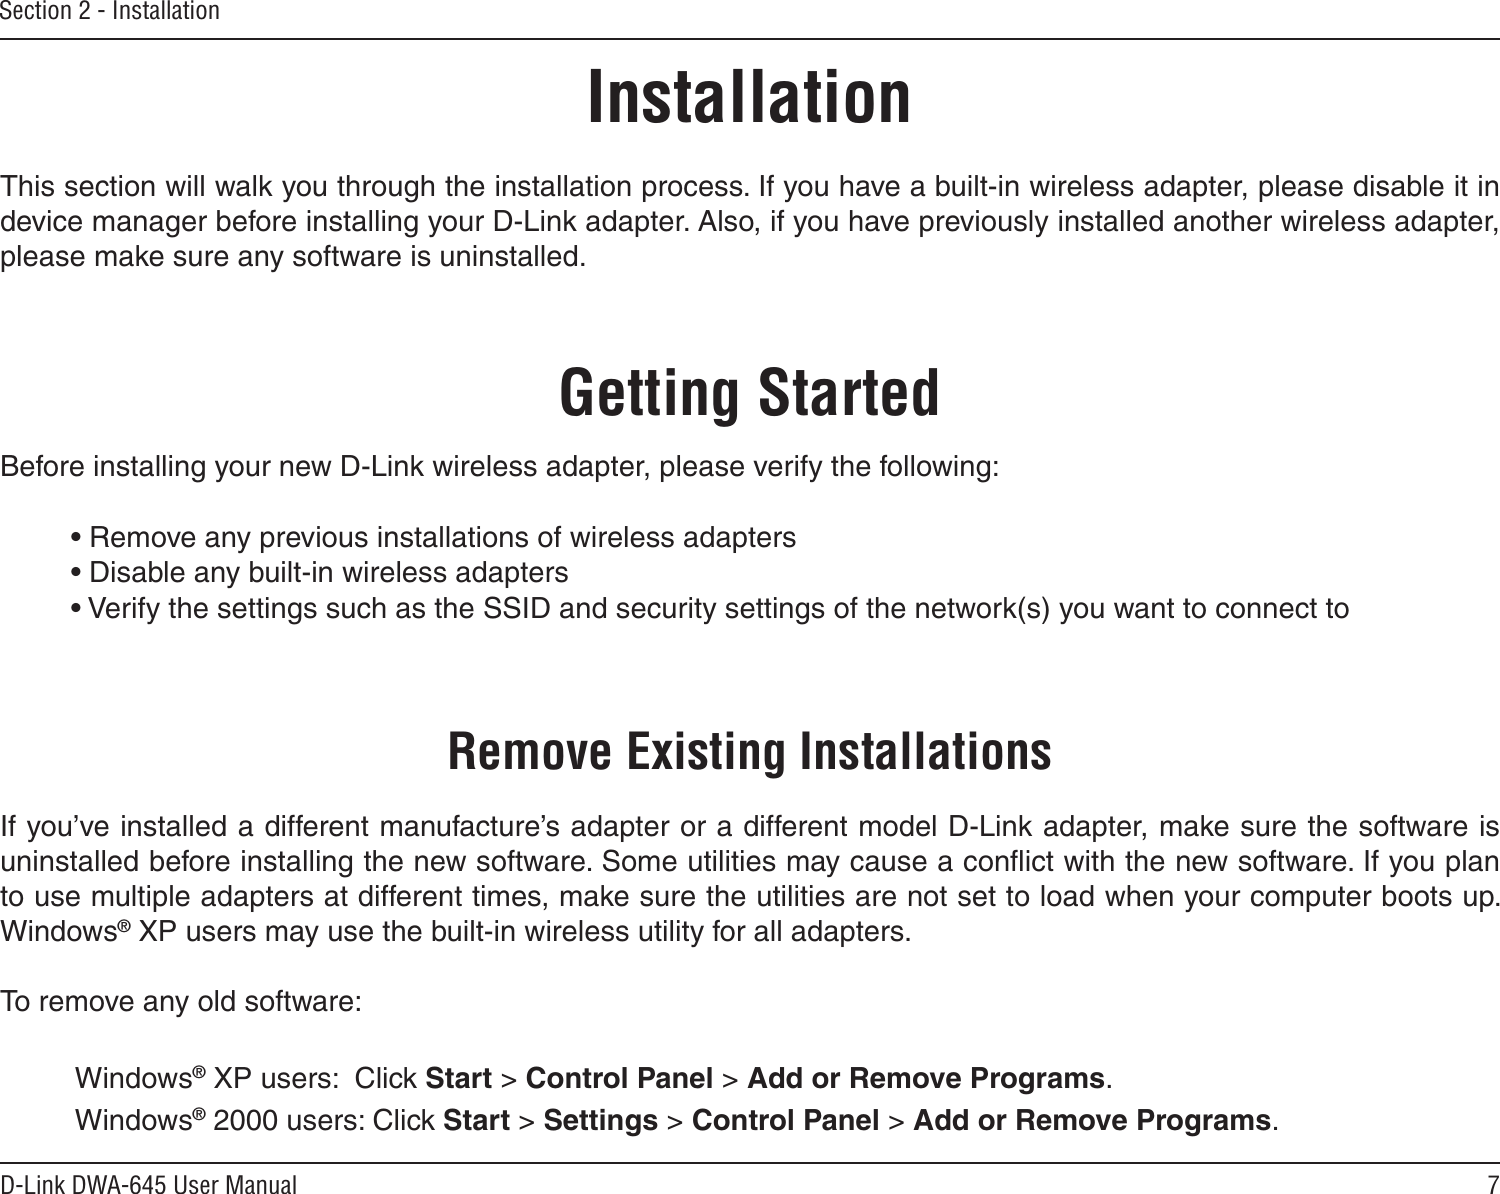 7D-Link DWA-645 User ManualSection 2 - InstallationGetting StartedInstallationThis section will walk you through the installation process. If you have a built-in wireless adapter, please disable it in device manager before installing your D-Link adapter. Also, if you have previously installed another wireless adapter, please make sure any software is uninstalled.Before installing your new D-Link wireless adapter, please verify the following:• Remove any previous installations of wireless adapters• Disable any built-in wireless adapters• Verify the settings such as the SSID and security settings of the network(s) you want to connect toRemove Existing InstallationsIf you’ve installed a different manufacture’s adapter or a different model D-Link adapter, make sure the software is uninstalled before installing the new software. Some utilities may cause a conﬂict with the new software. If you plan to use multiple adapters at different times, make sure the utilities are not set to load when your computer boots up. Windows® XP users may use the built-in wireless utility for all adapters.To remove any old software:  Windows® XP users:  Click Start &gt; Control Panel &gt; Add or Remove Programs.   Windows® 2000 users: Click Start &gt; Settings &gt; Control Panel &gt; Add or Remove Programs.